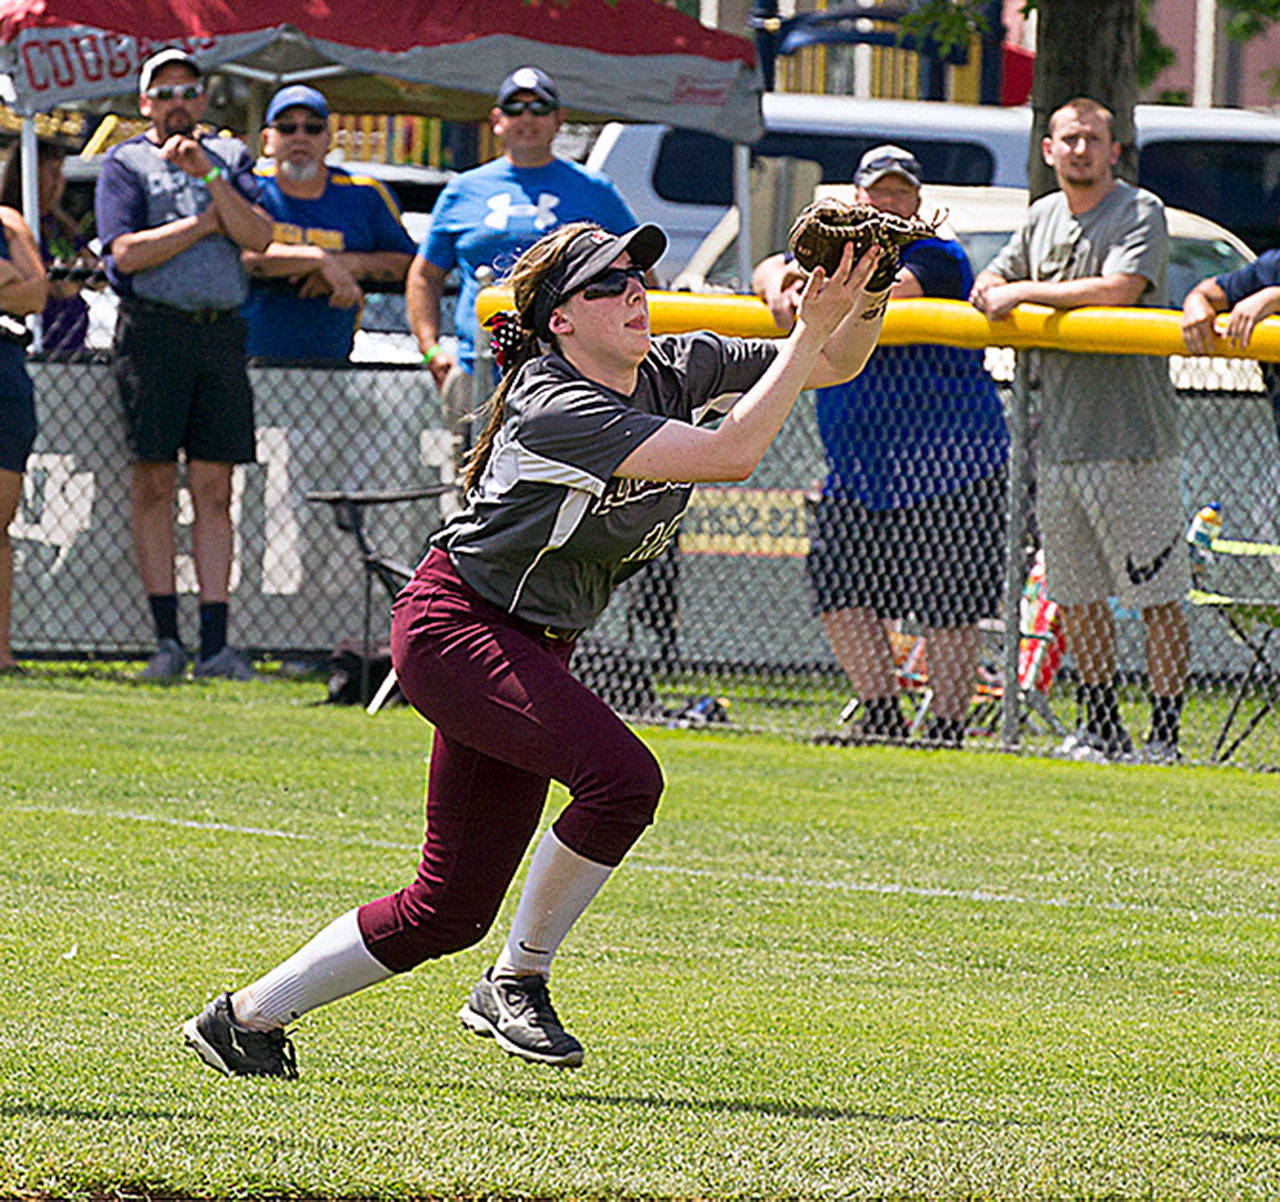 Montesano infielder Lexi Lovell makes a running catch during the 1A State Tournament last season. The Bulldogs return a core group of players that possess a state-championship pedigree. (Photo by Shawn Donnelly)